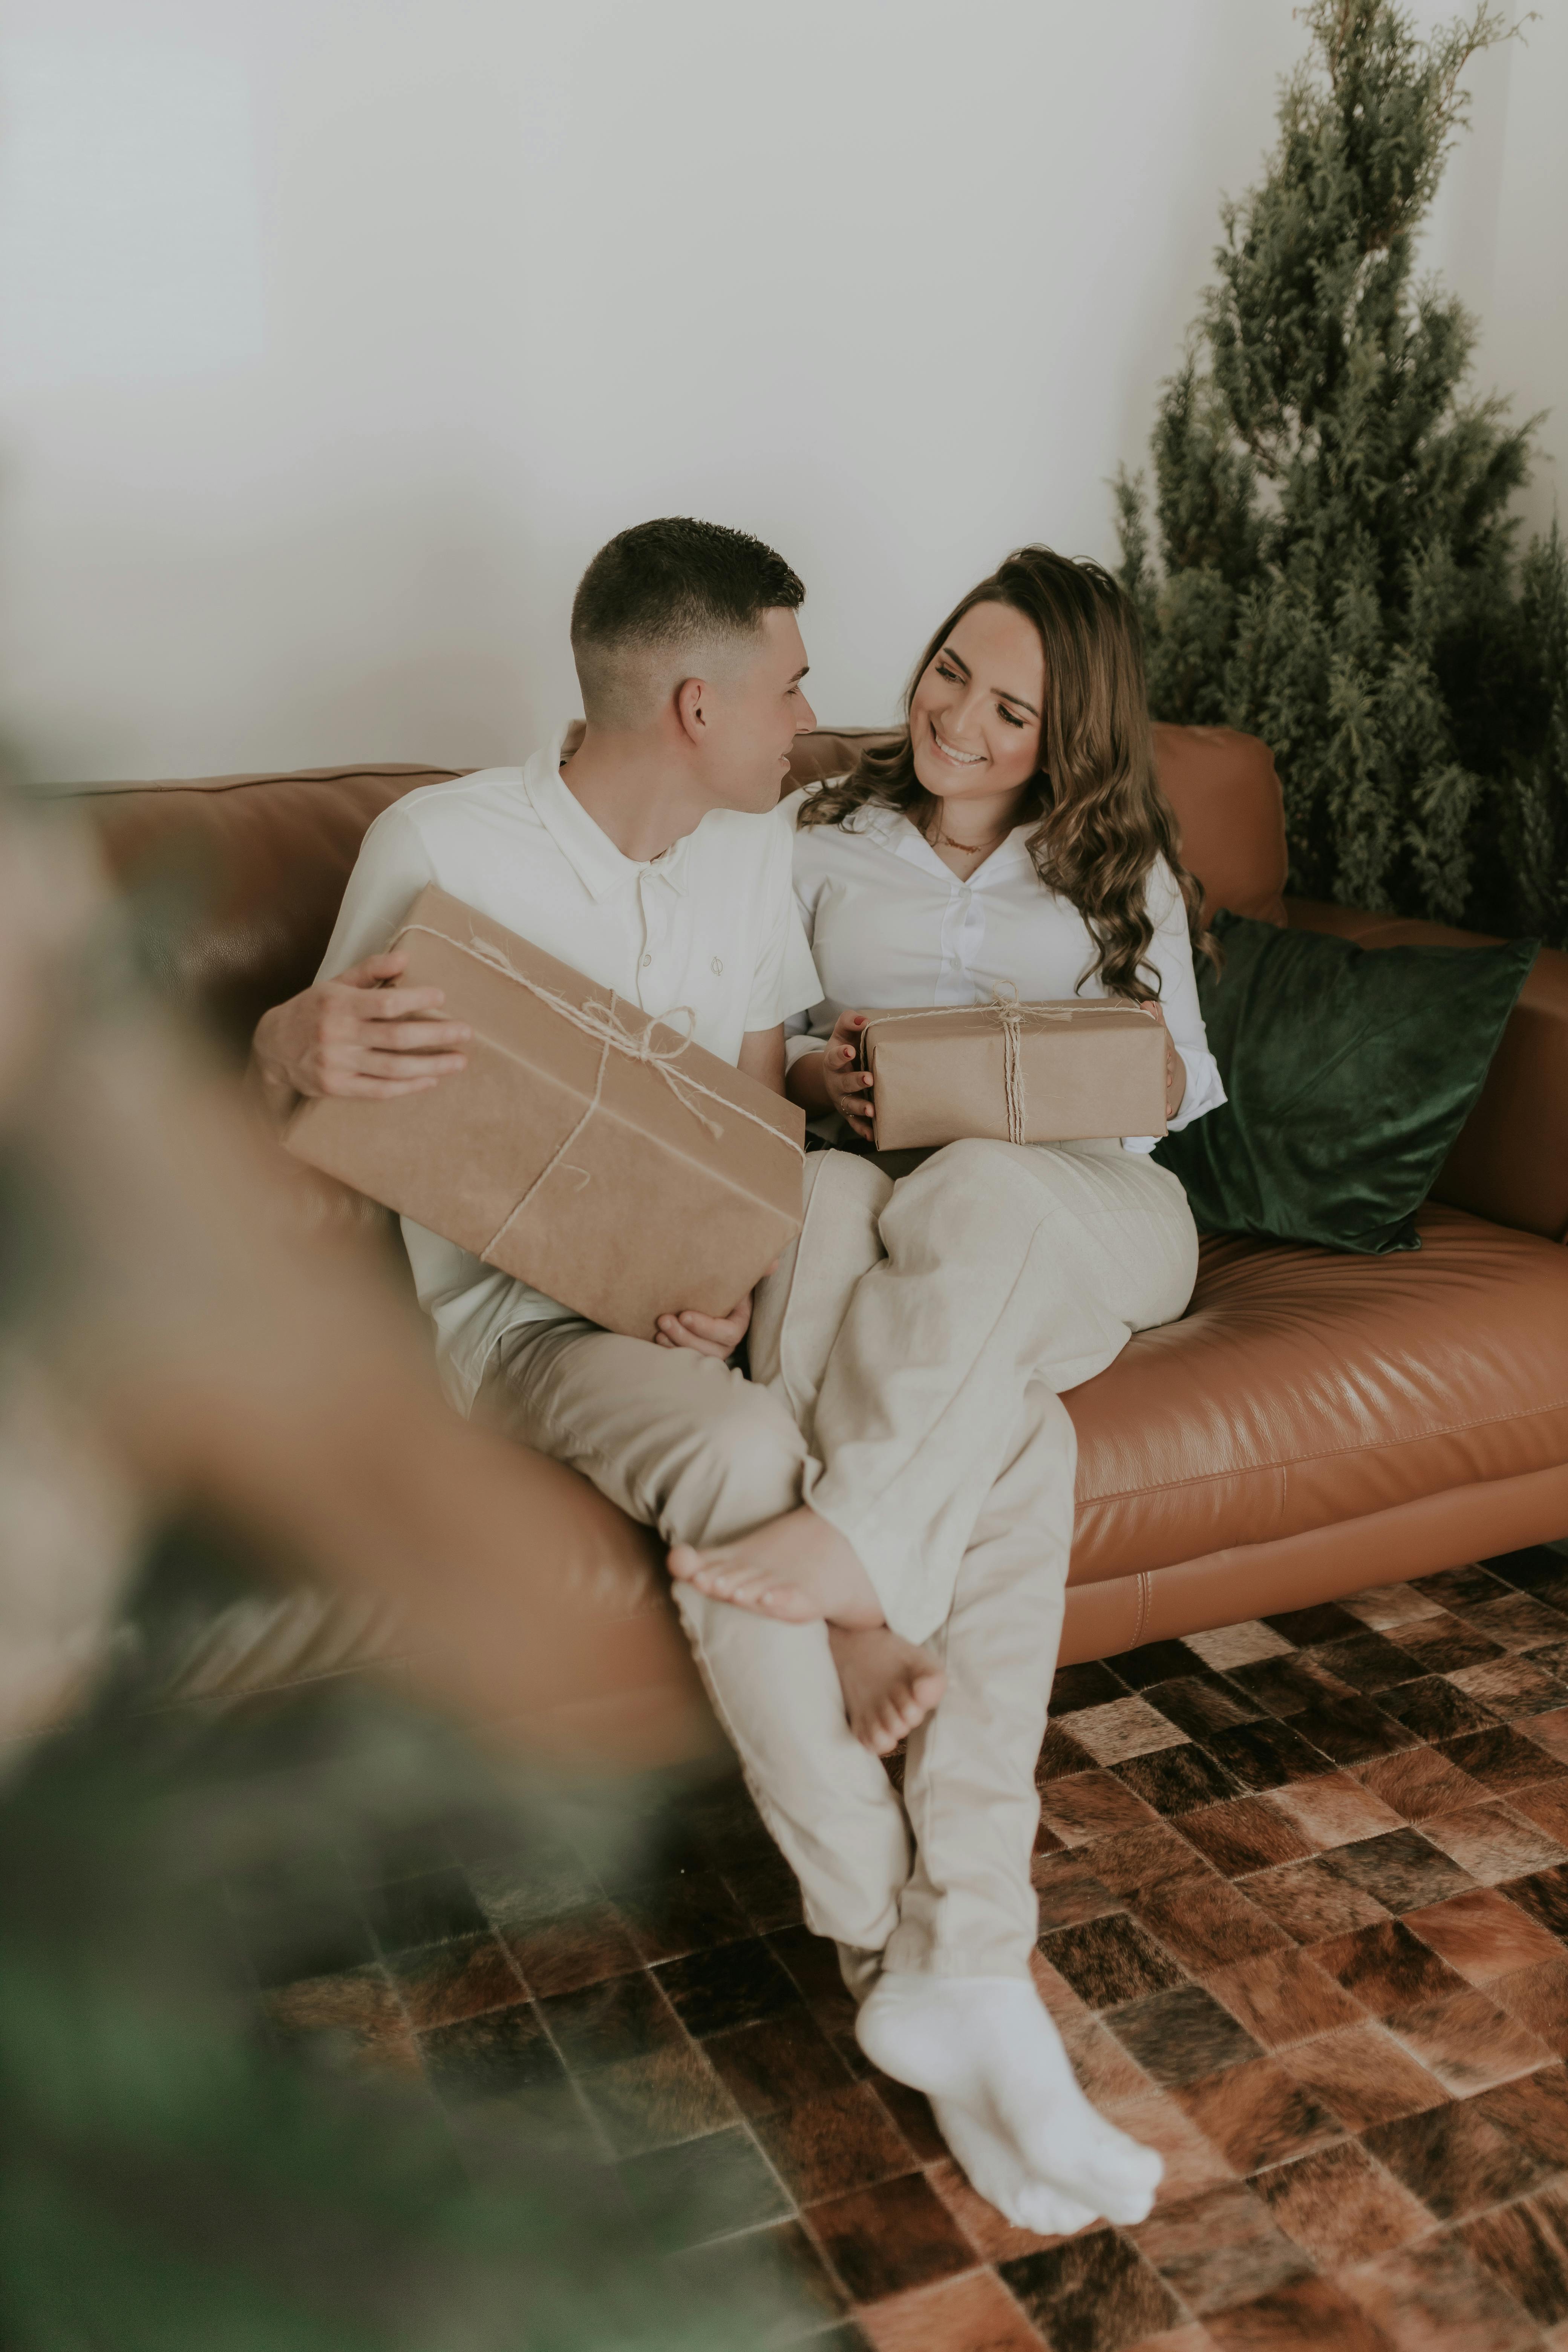 A happy couple sitting with gift boxes | Source: Pexels